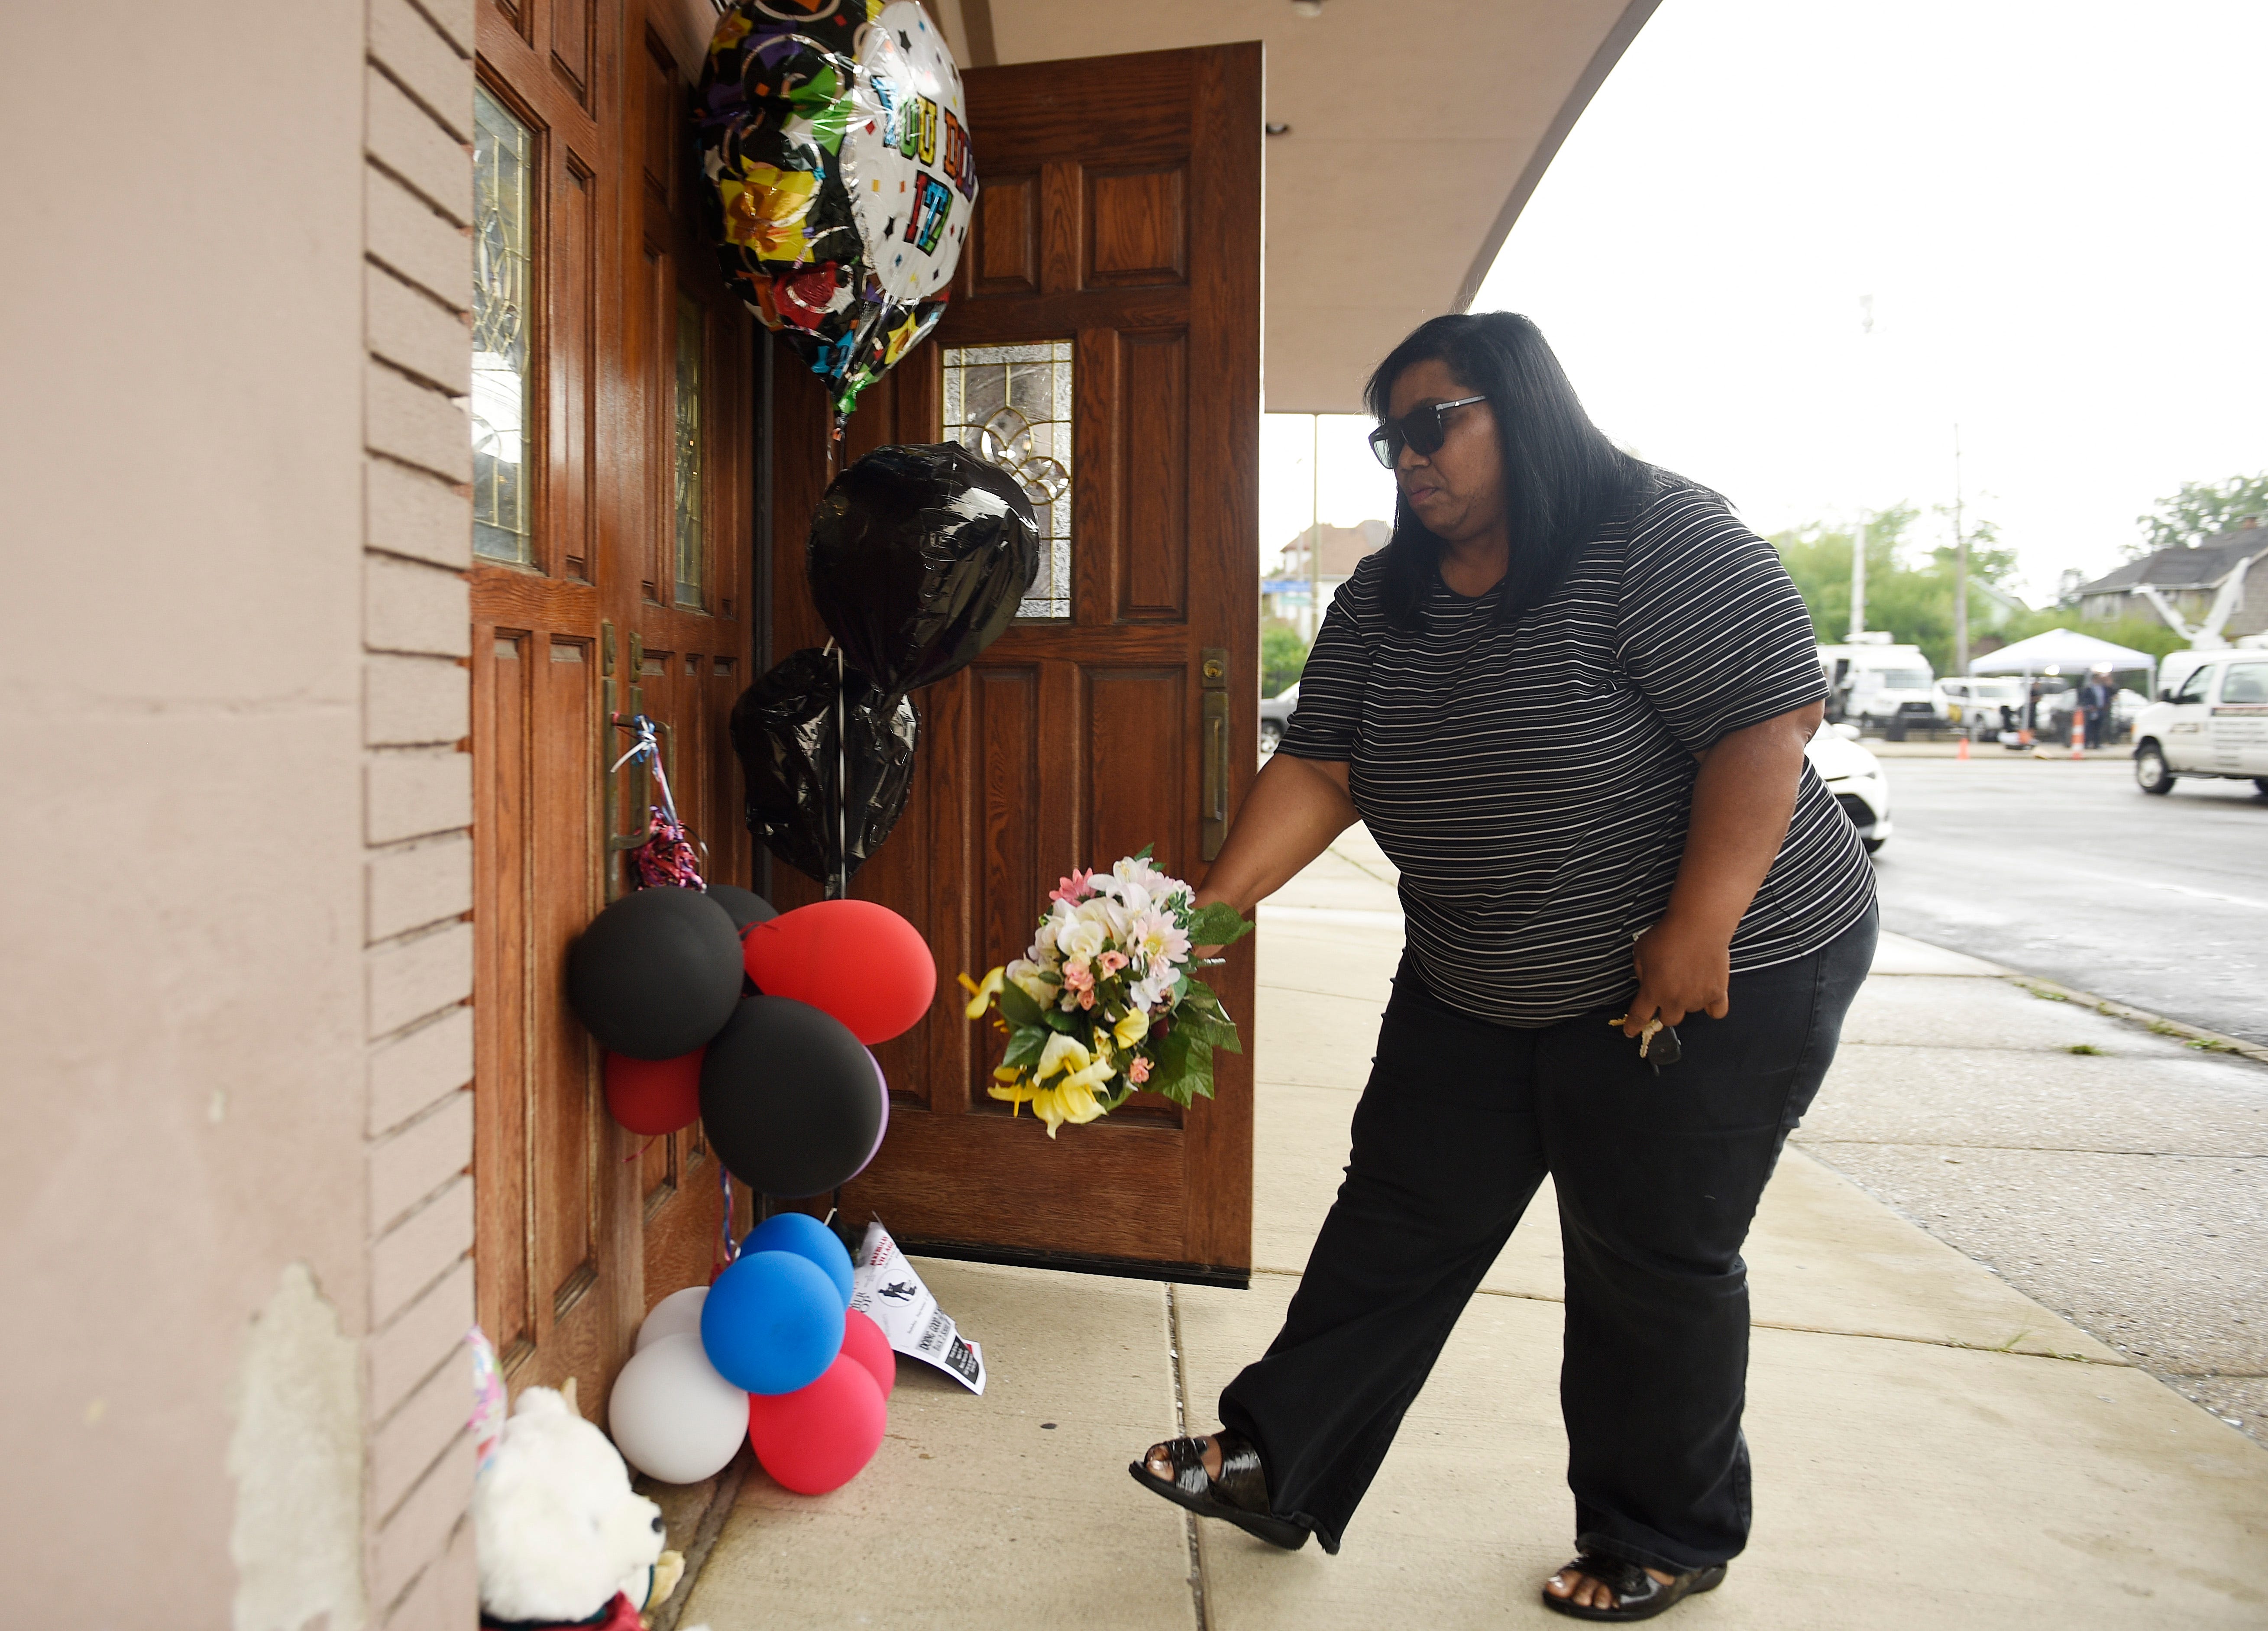 Carolyn Thompson of Detroit leaves a bouquet of flowers for Aretha Franklin at New Bethel Baptist Church in Detroit on Thursday, Aug. 16, 2018.